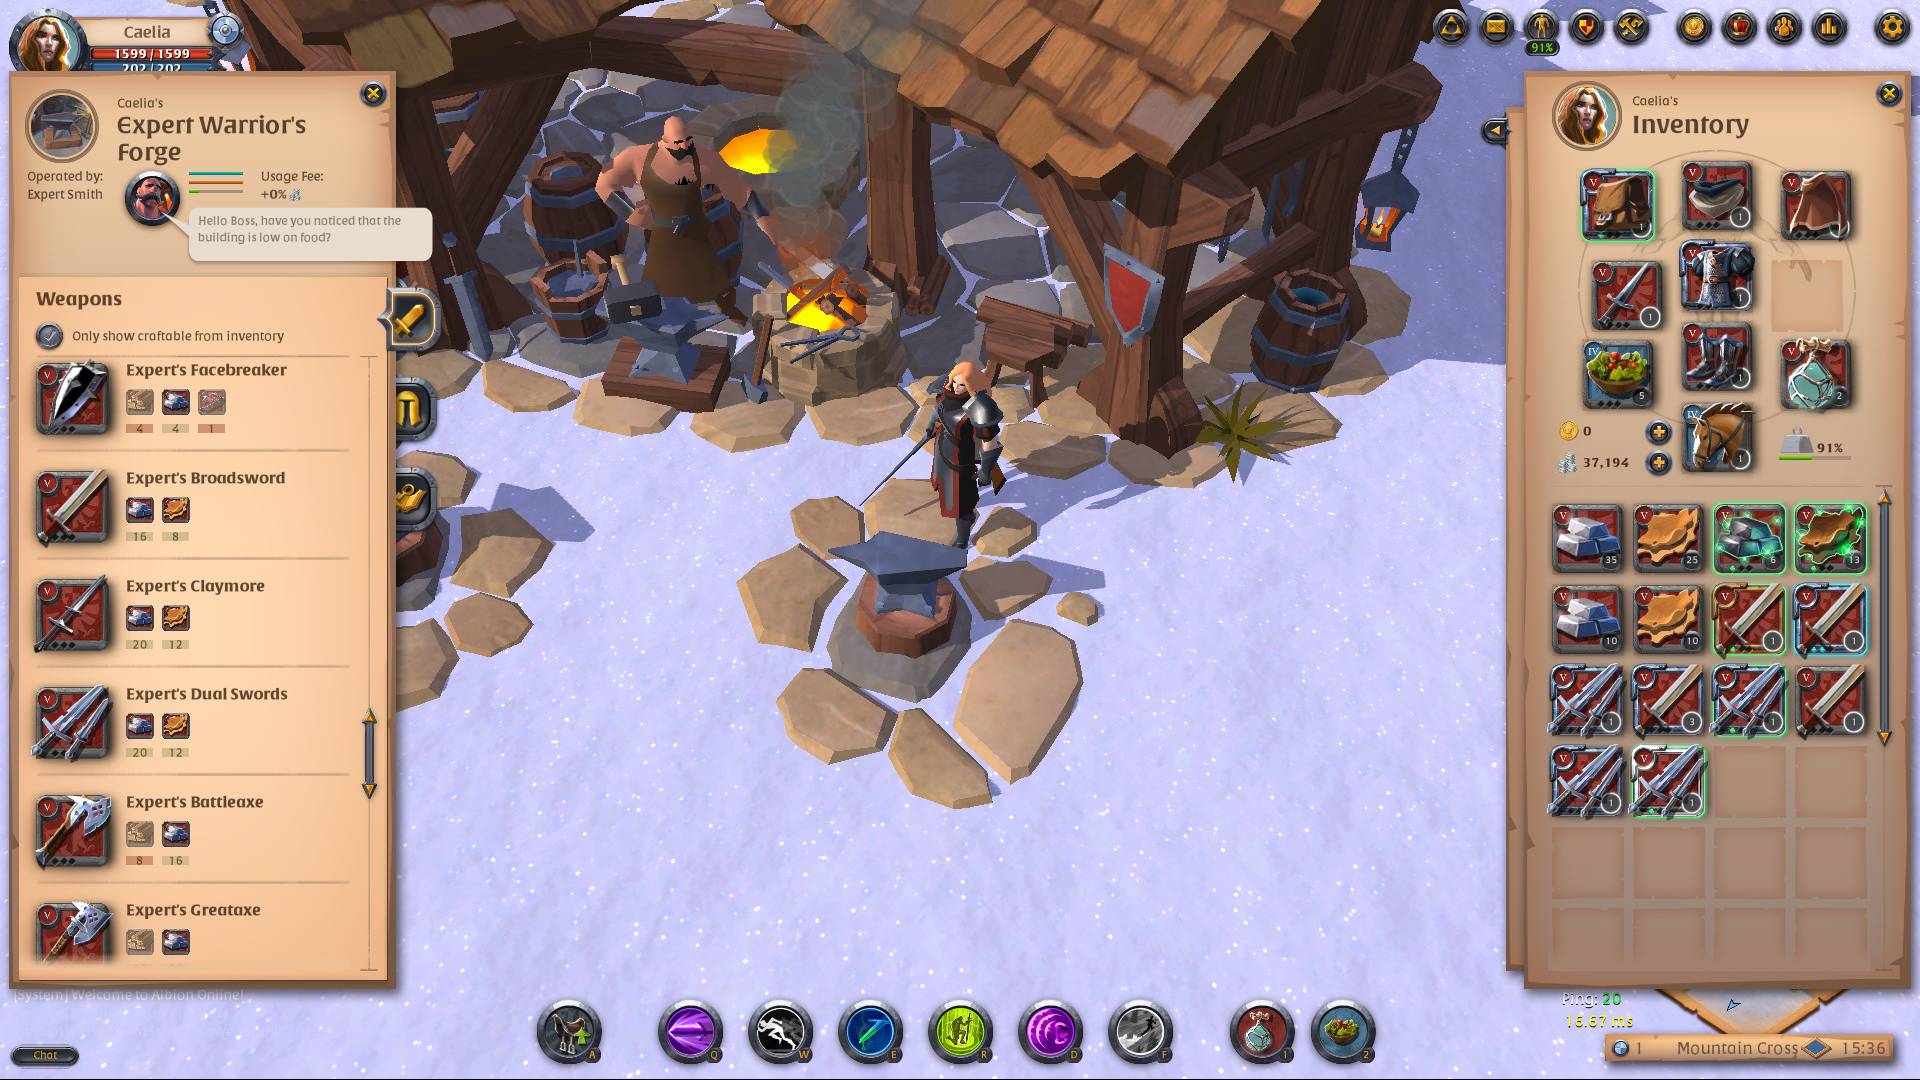 Best free PC games: Albion Online. Image shows a character standing outside a house on a snowy day, with lots of the game